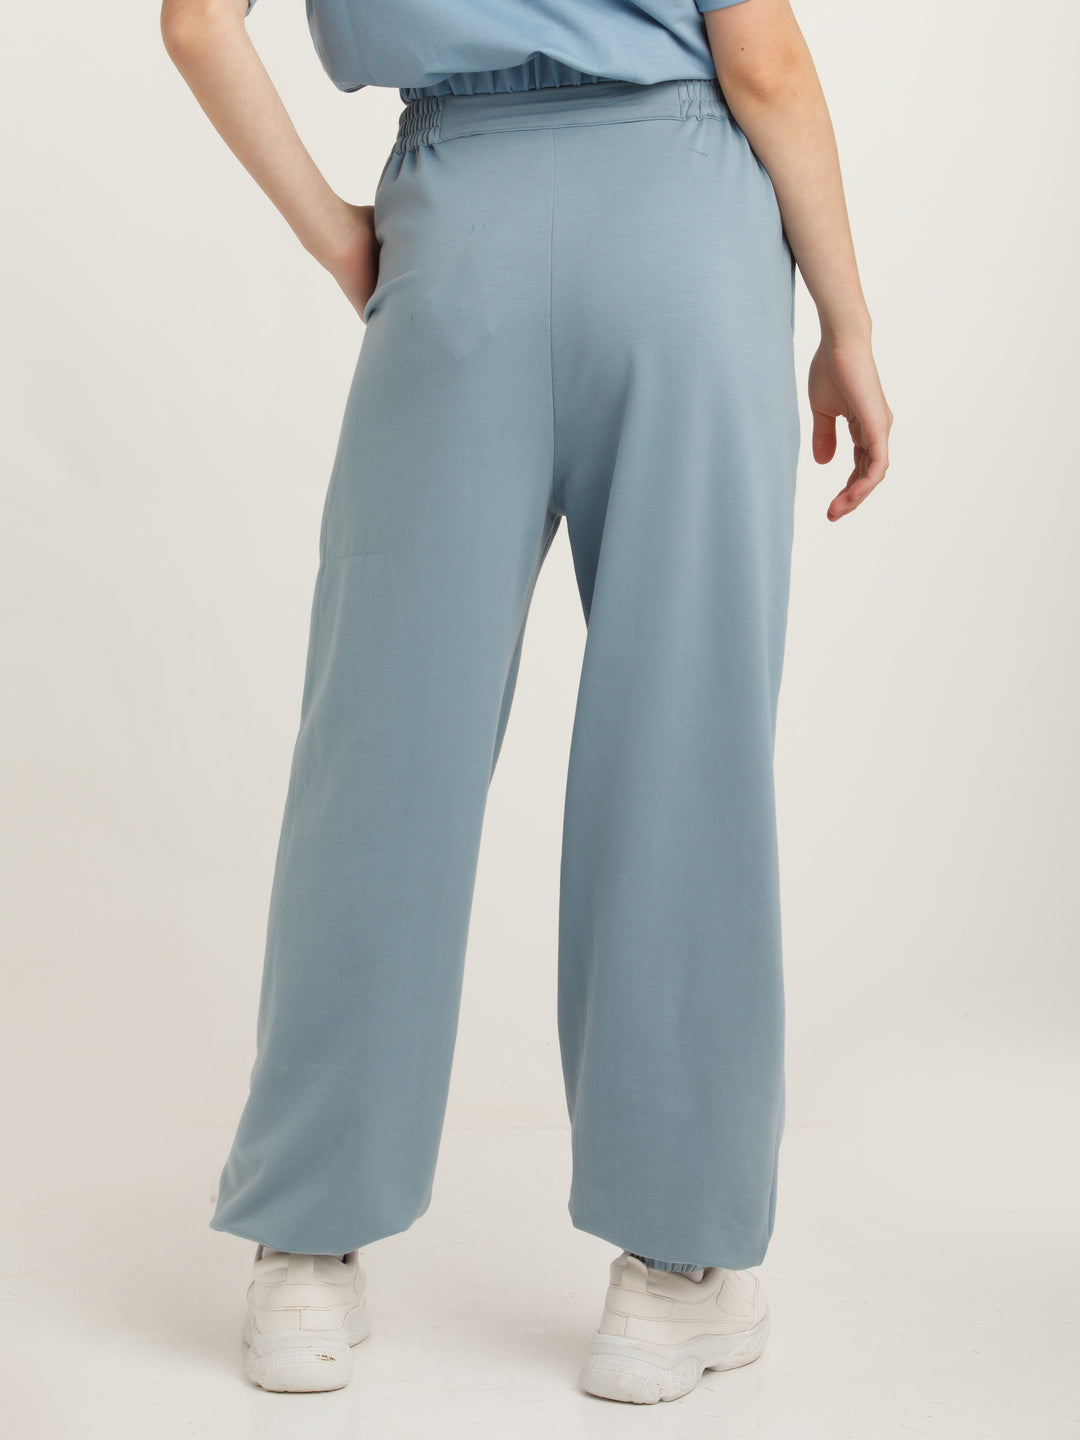 Blue Solid Elasticated Joggers For Women